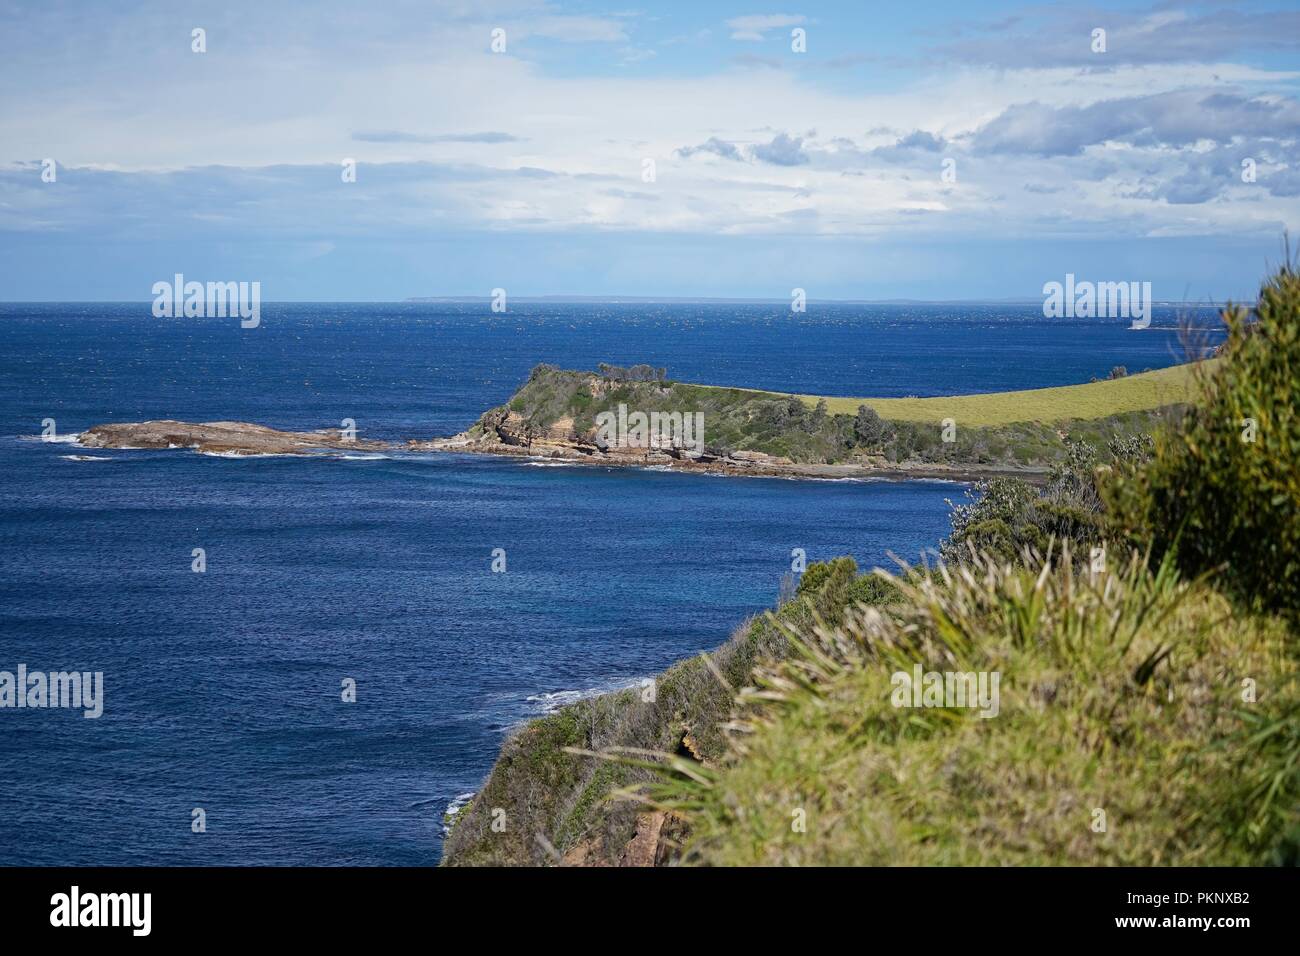 Coastal view of a headland, in the middle distance, from a higher vantage point. The horizon in the distance. Stock Photo